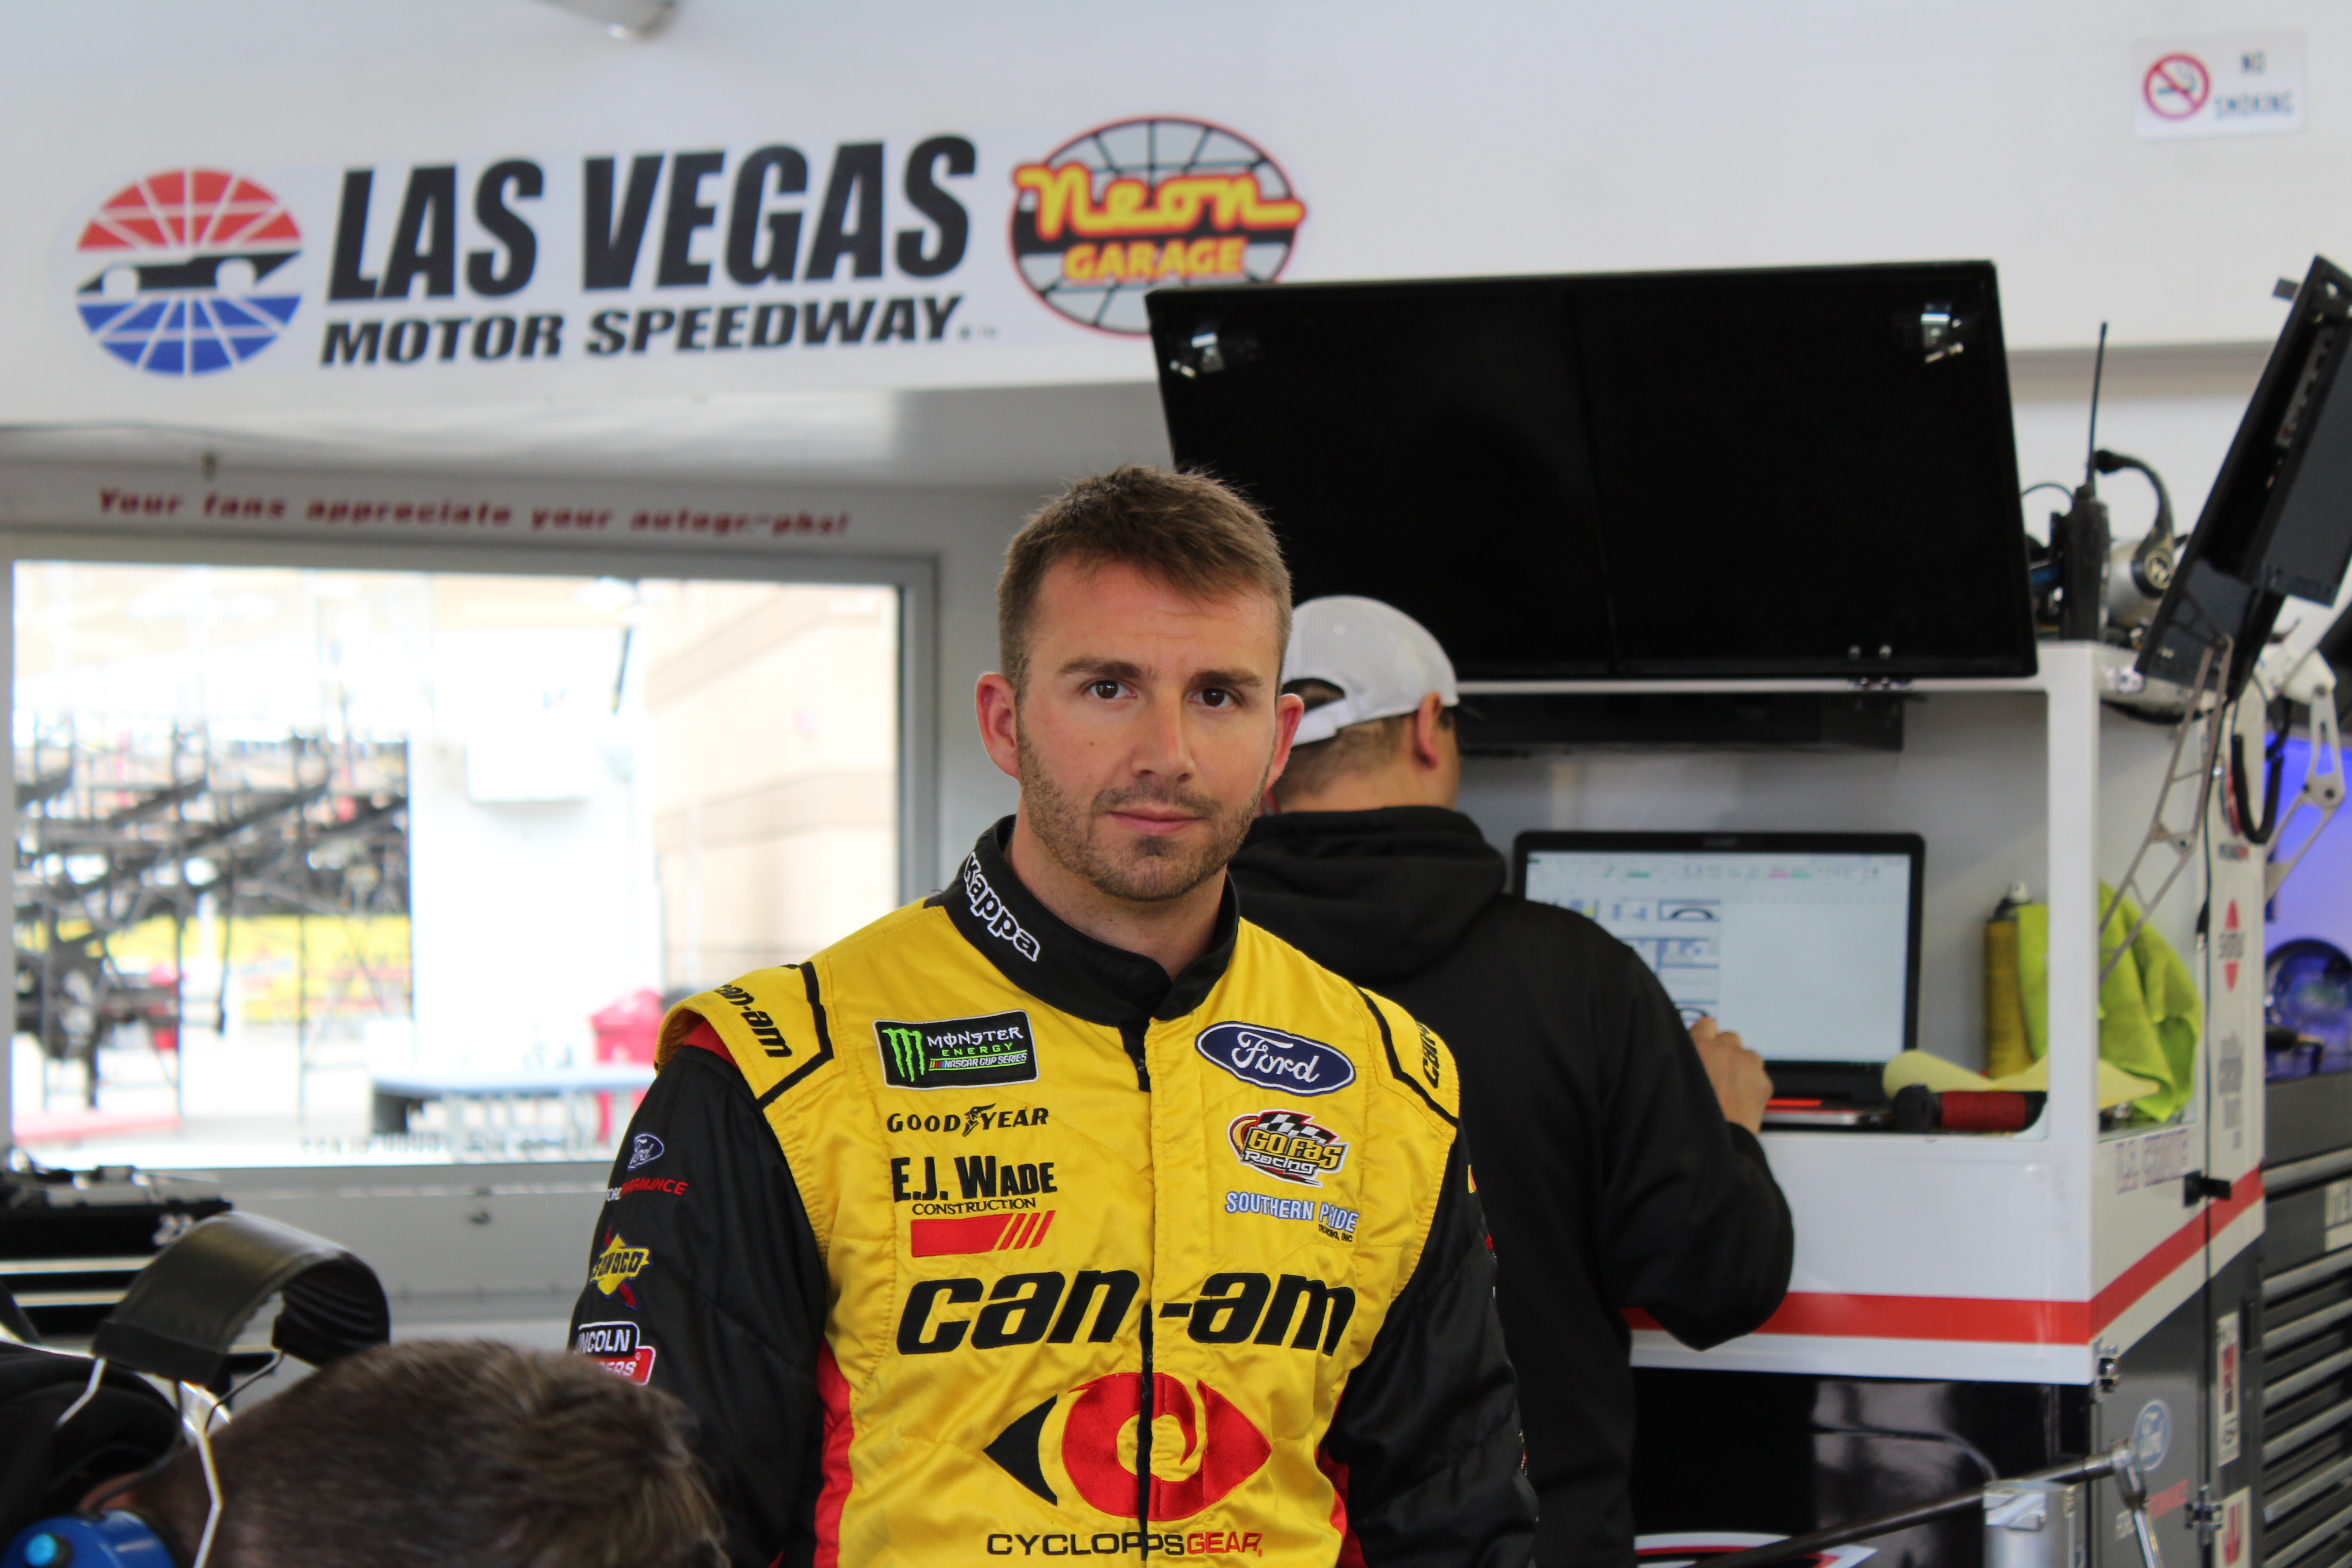 Coming off a solid 22nd at Las Vegas, Matt DiBenedetto dishes his thoughts to us! (Photo Credit: Jose L. Acero Jr/TPF)